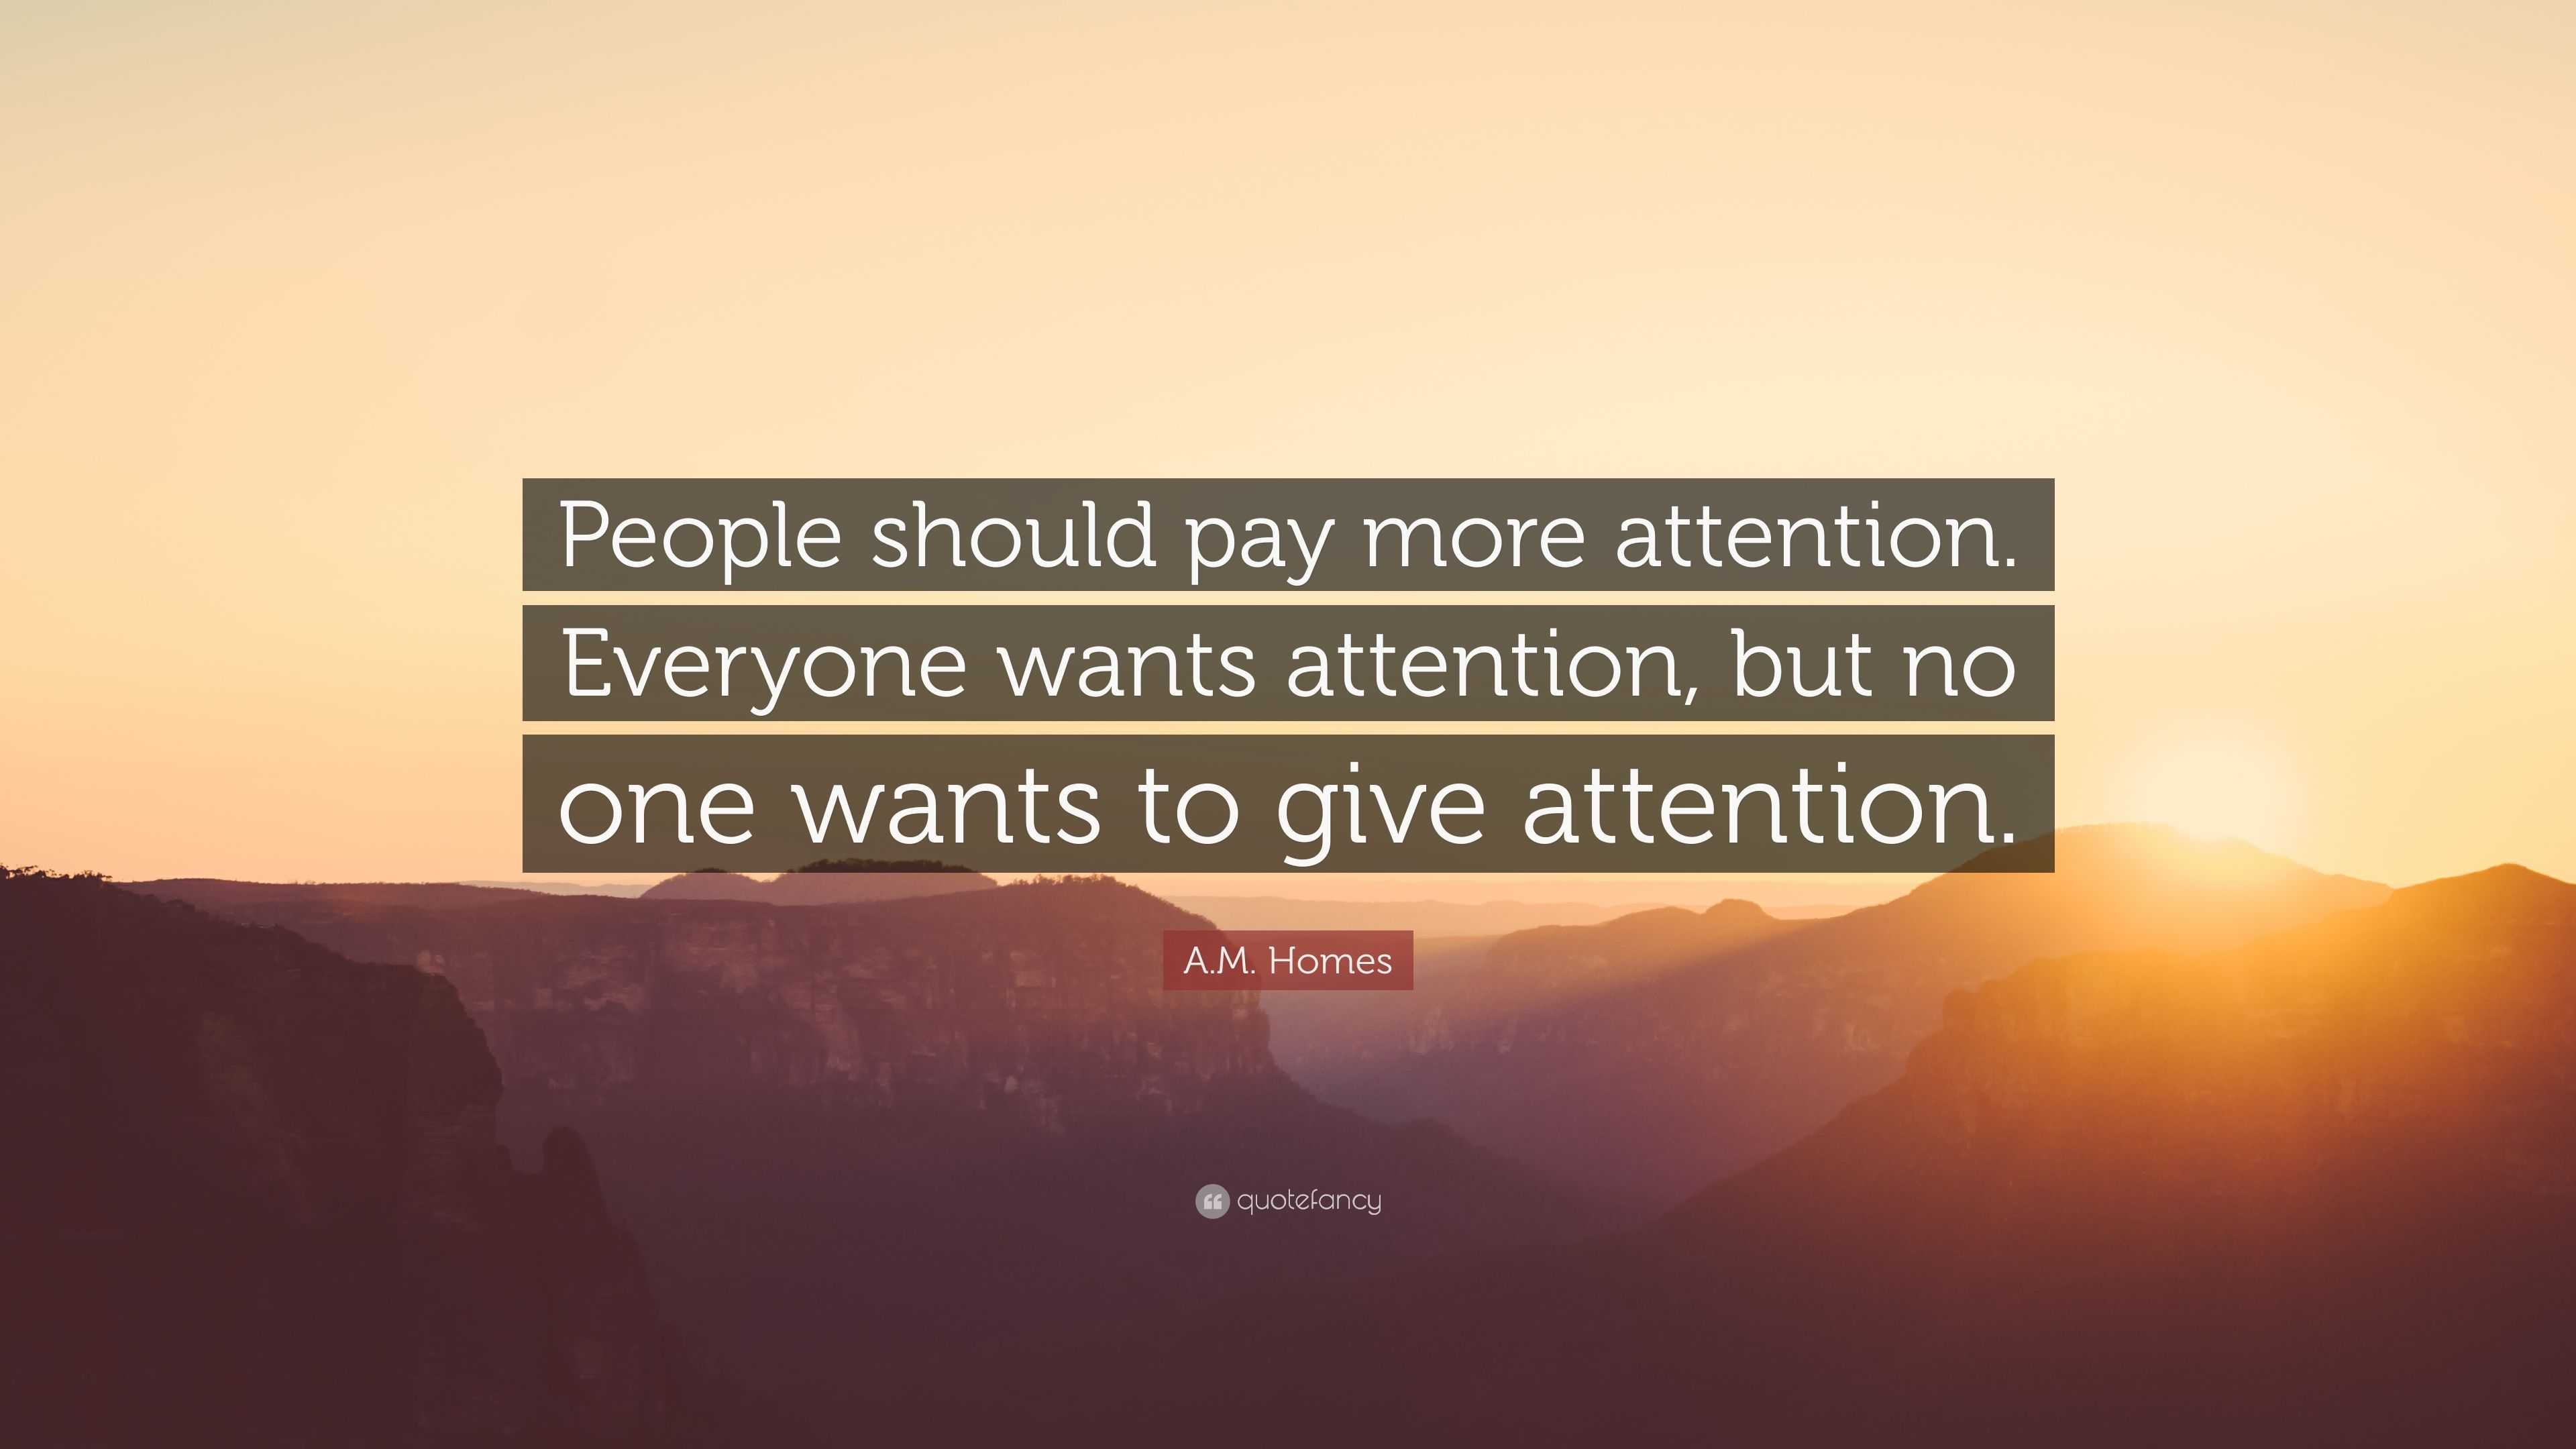 A.M. Homes Quote: “People should pay more attention. Everyone wants ...
